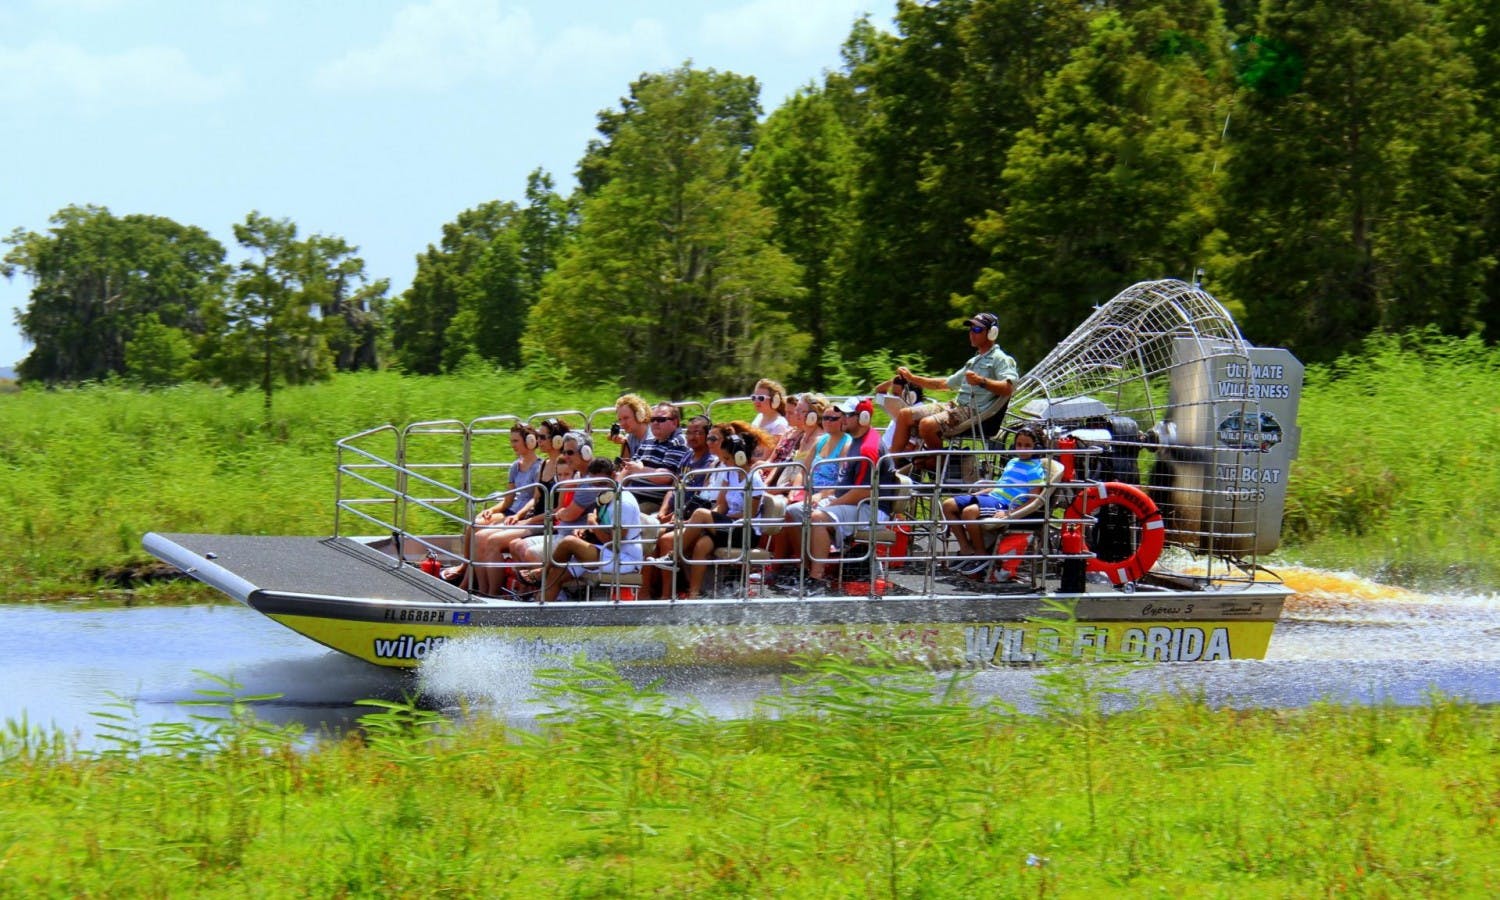 Wild Florida ultimate airboat ride with transportation from Orlando